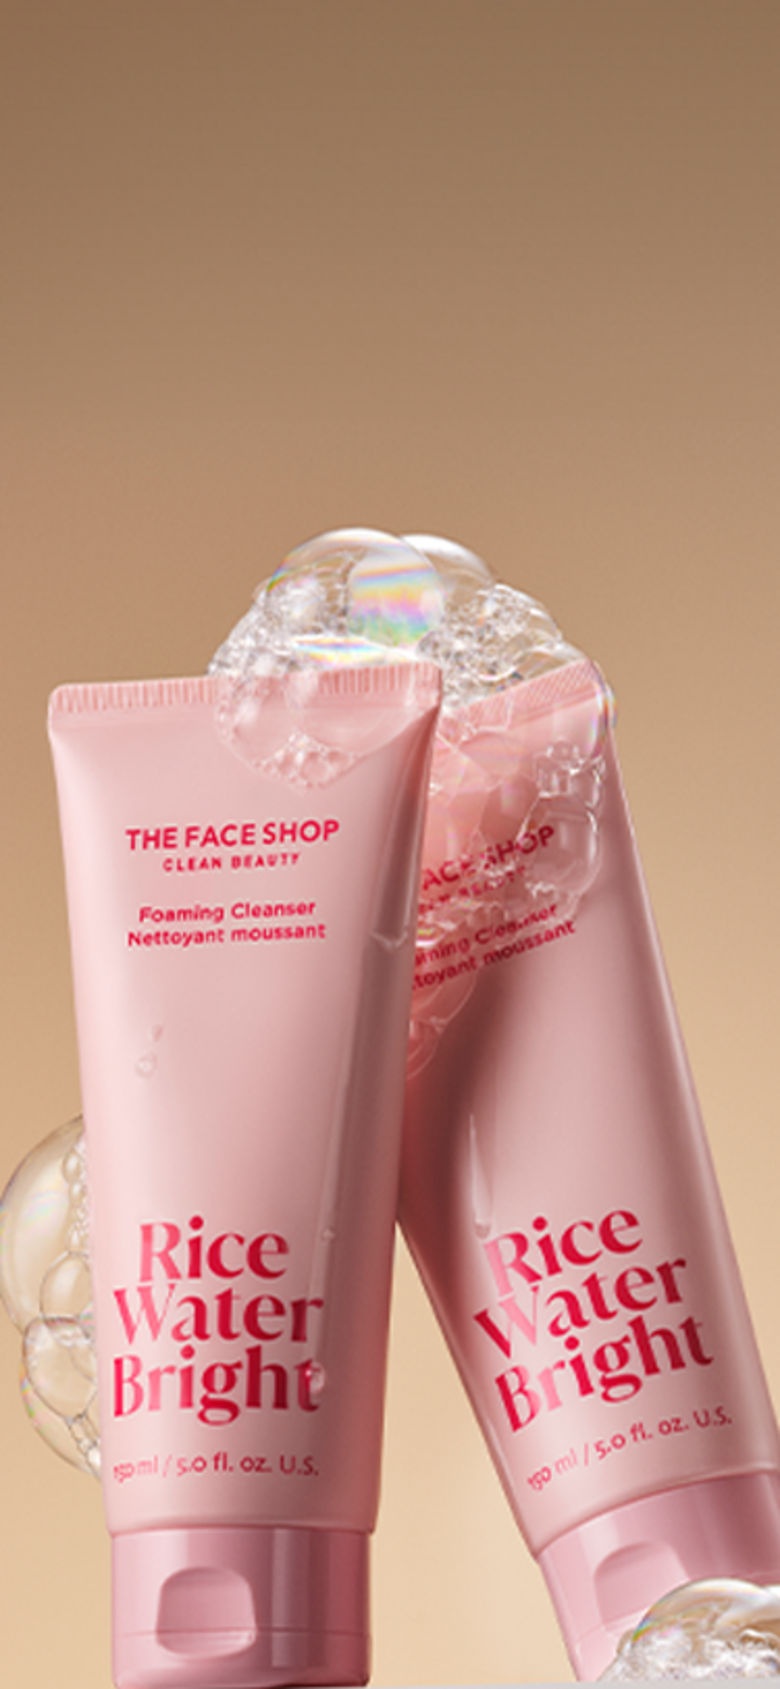 Two tubes of the face shop rice water bright cleansing foam covered in bubbles are displayed on a warm beige background.